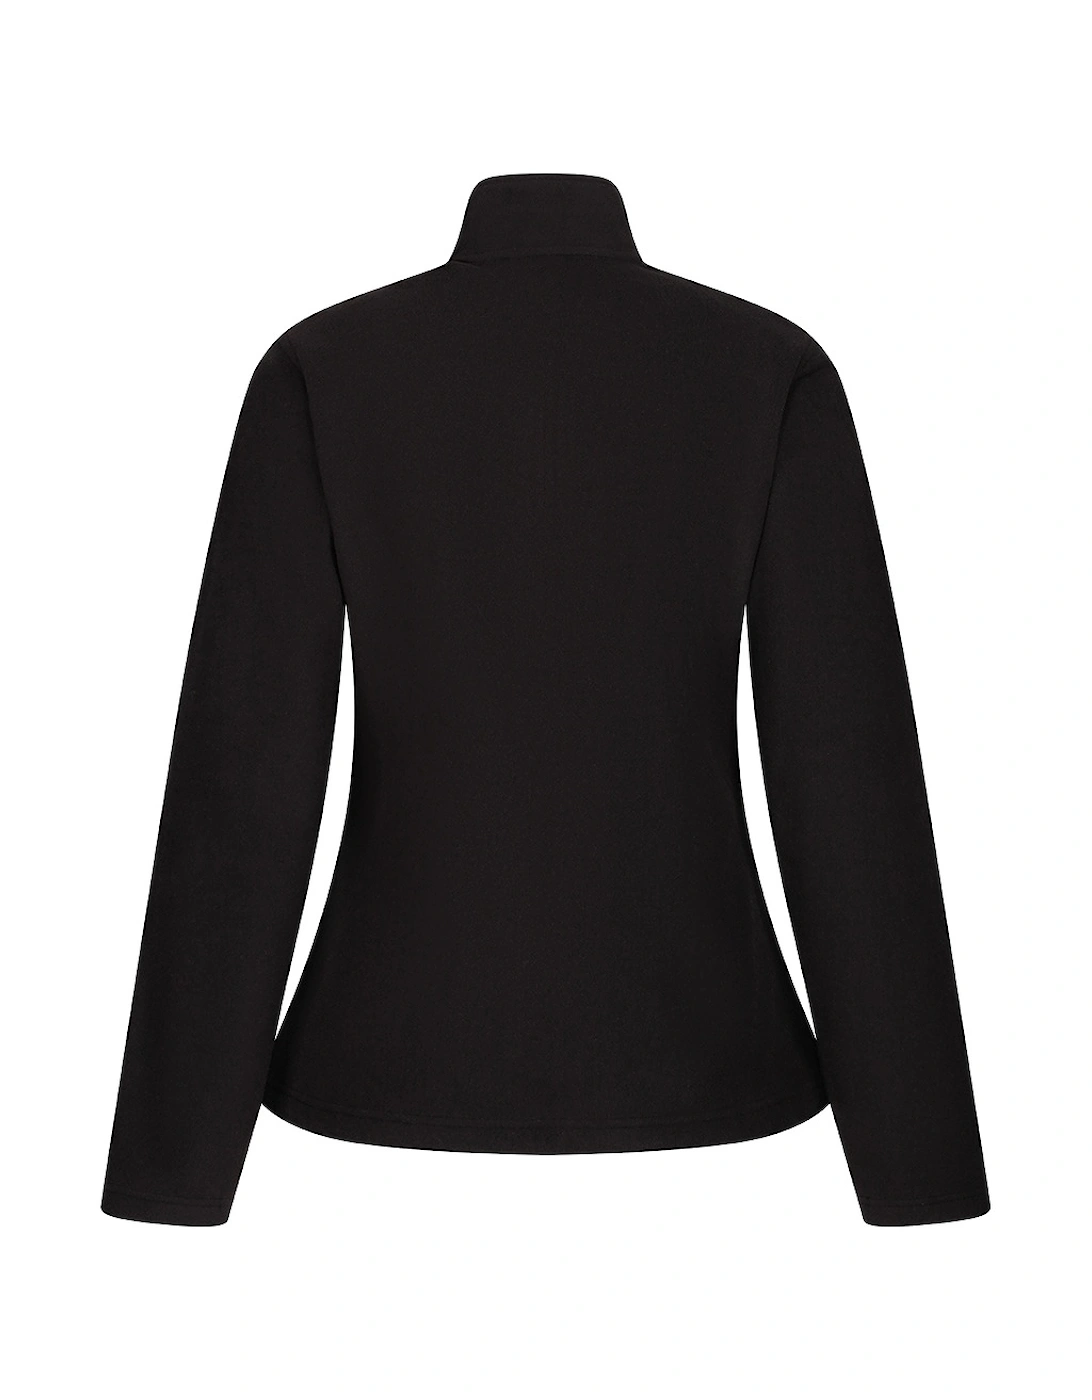 Womens/Ladies Honestly Made Recycled Fleece Jacket